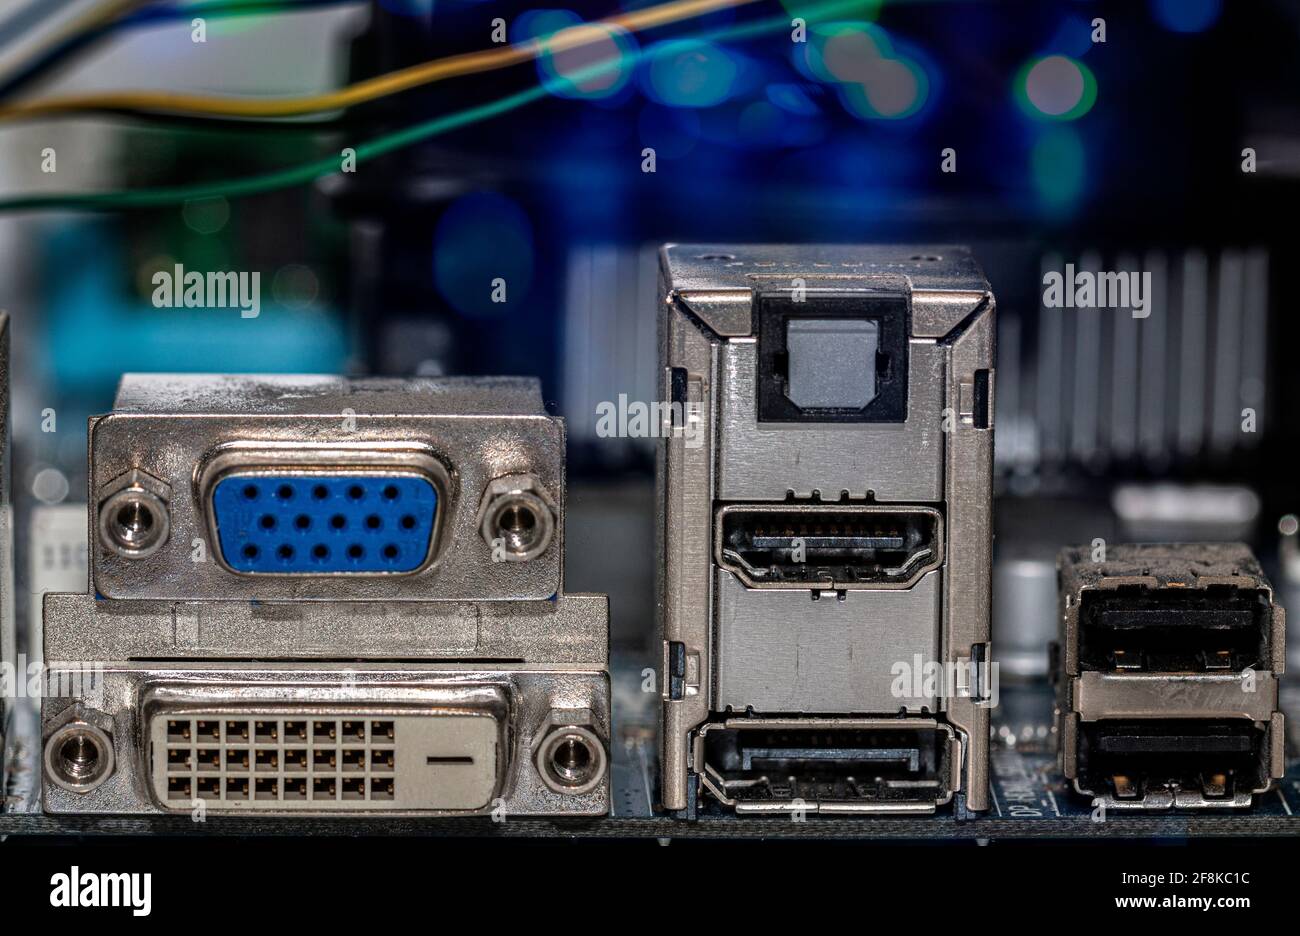 Various monitor connections on a mainboard Stock Photo